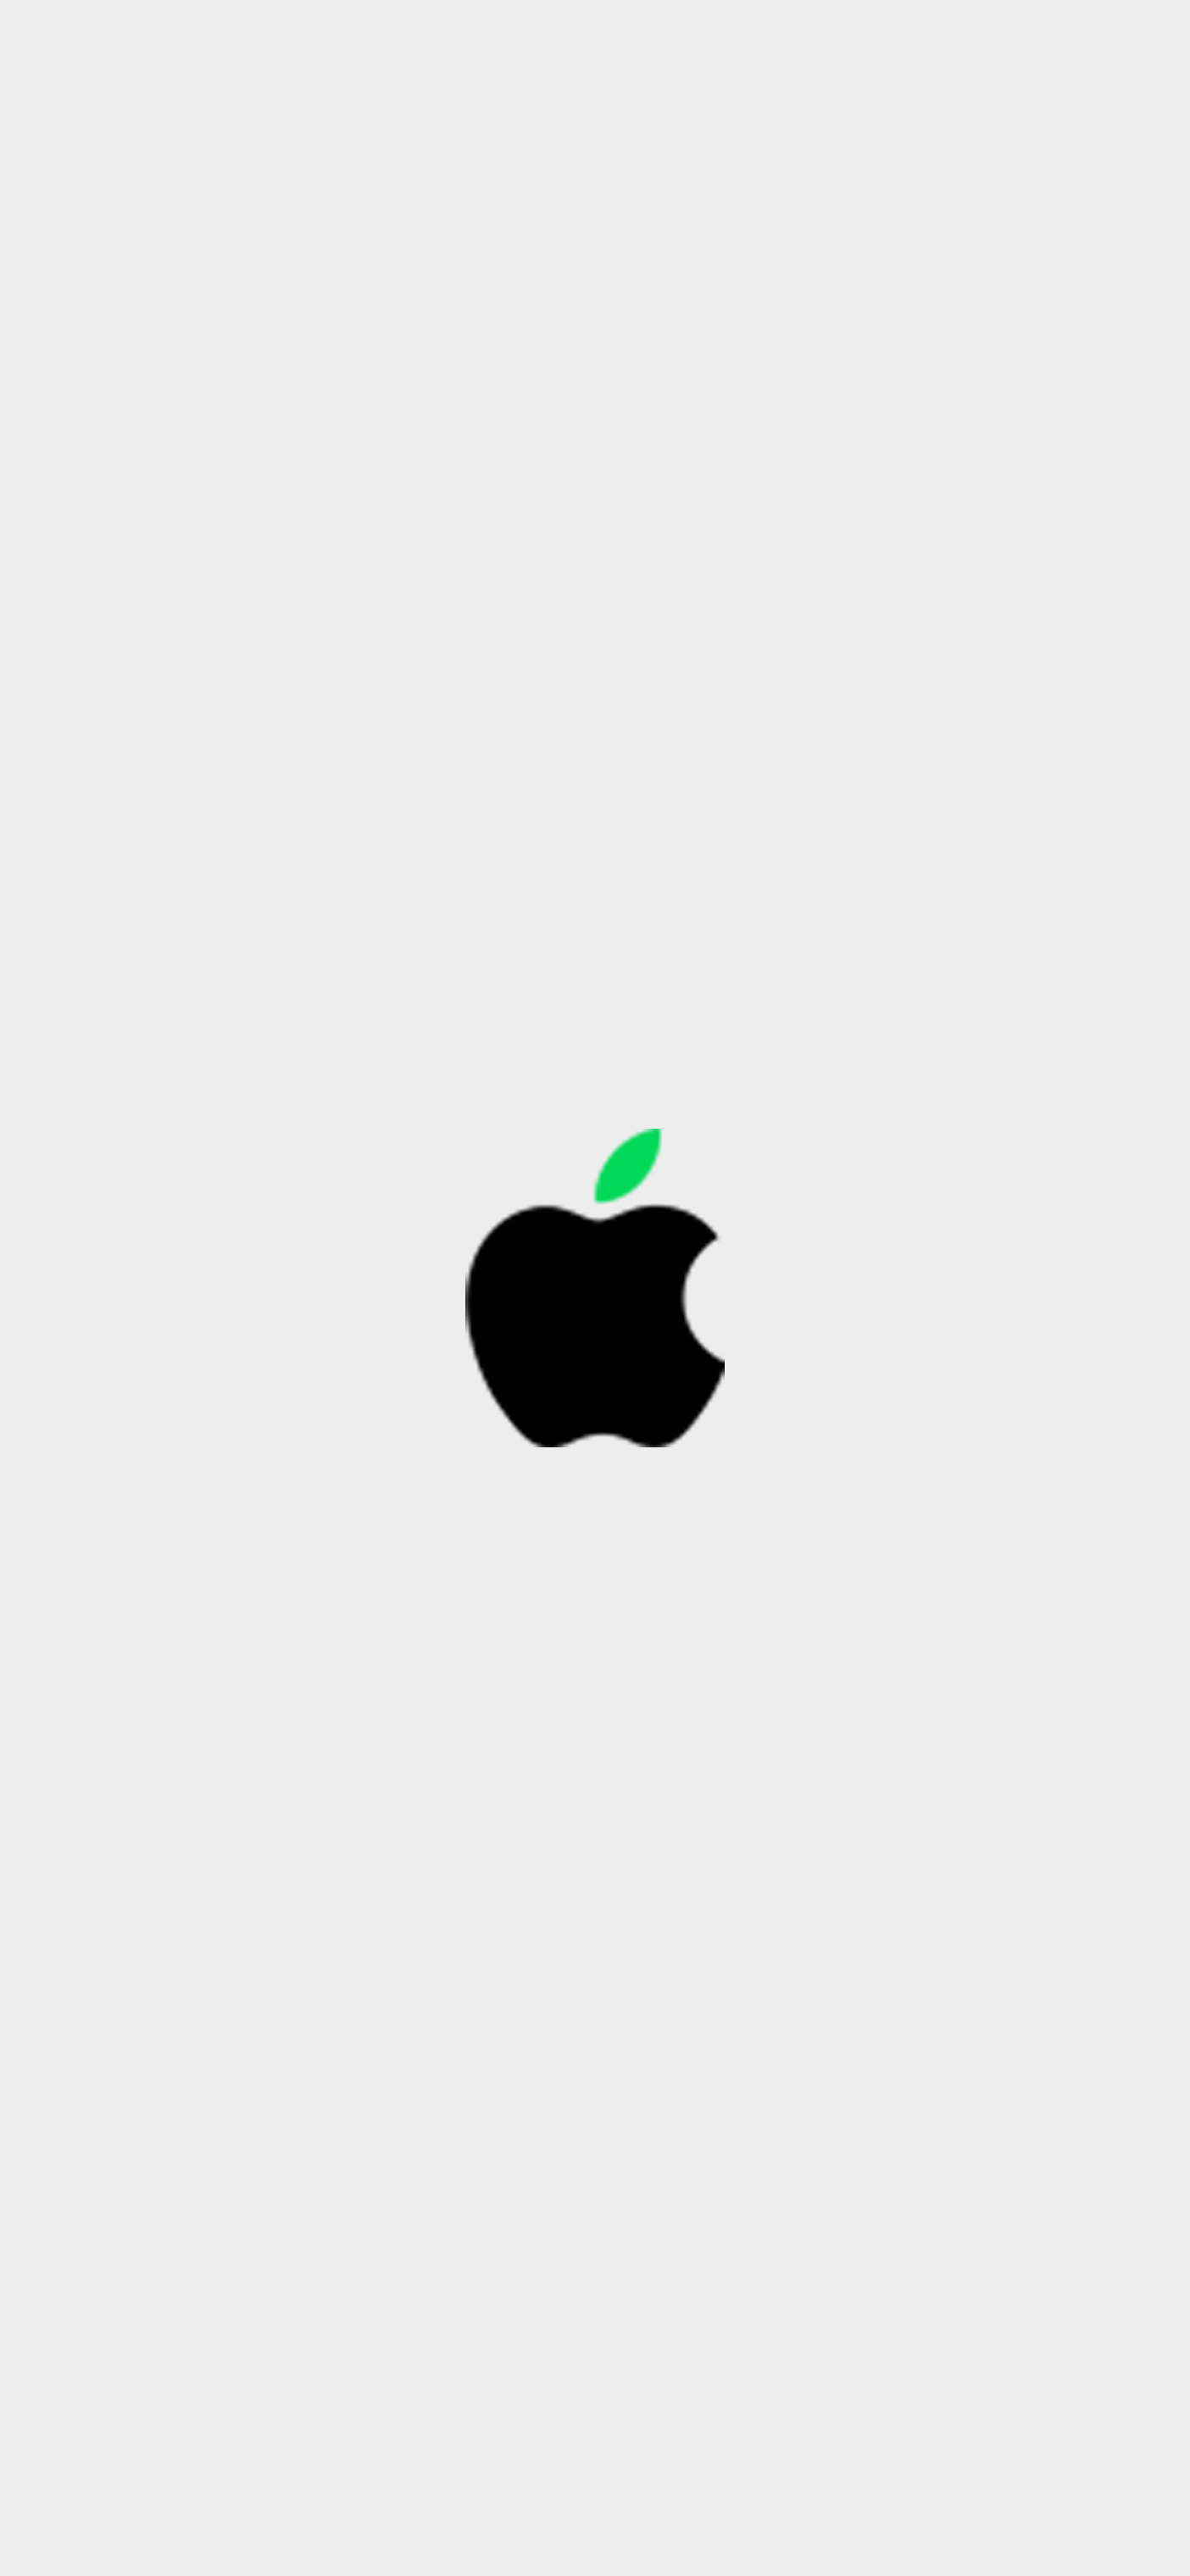 Apple Logo Iphone 12 Pro Max Wallpapers Wallpaper Cave